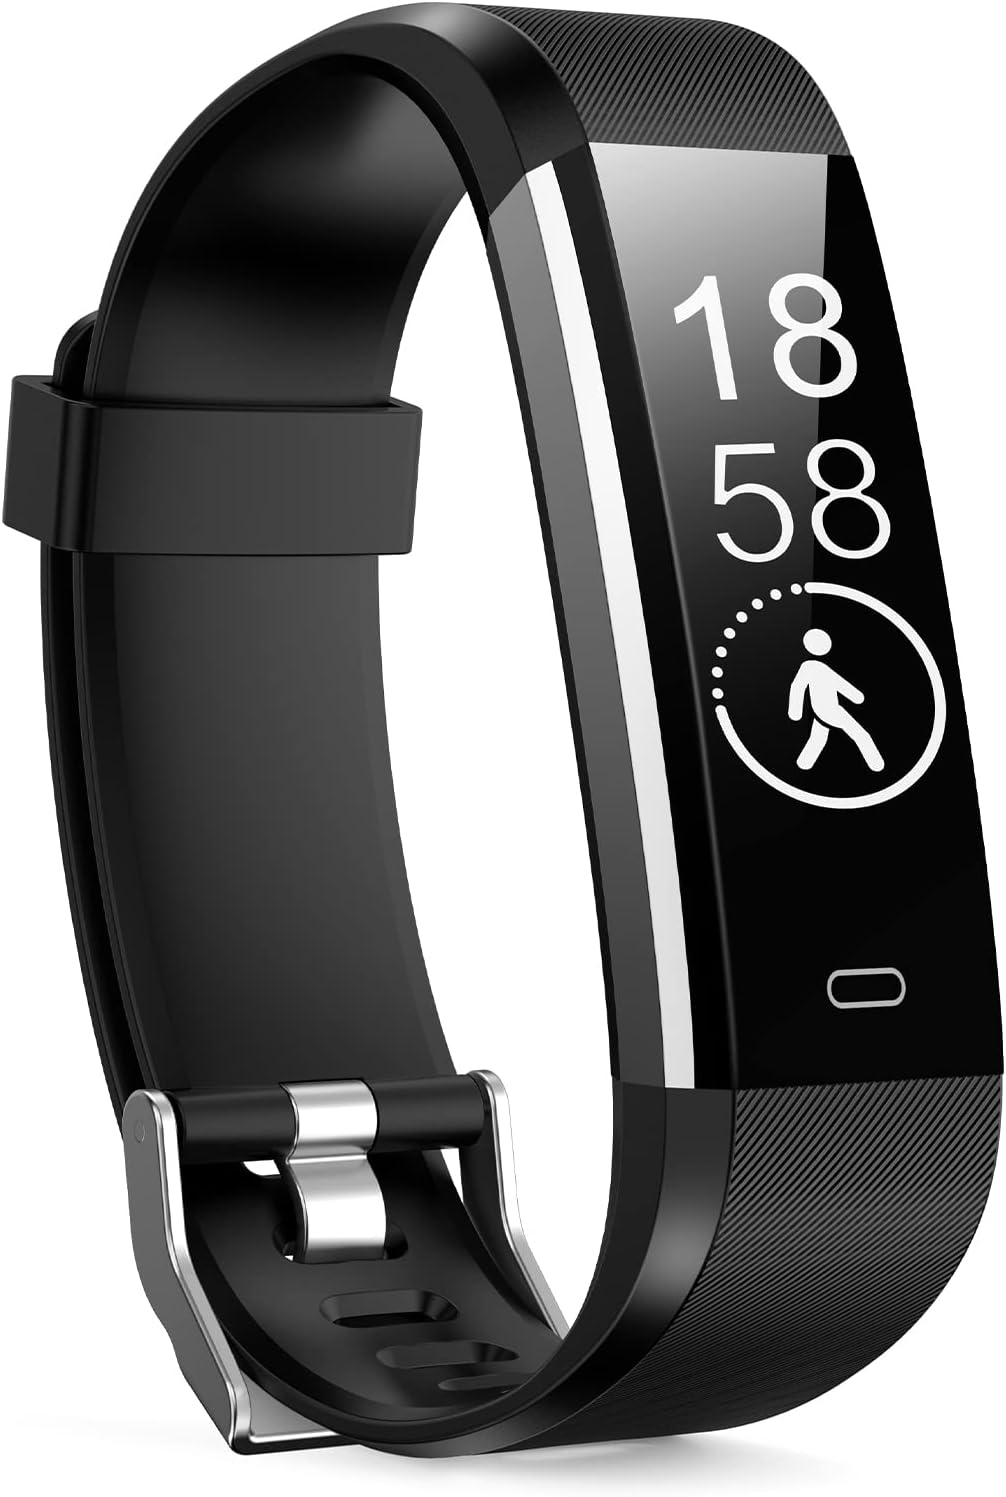 Stiive Fitness Tracker with Heart Rate Monitor, [...]